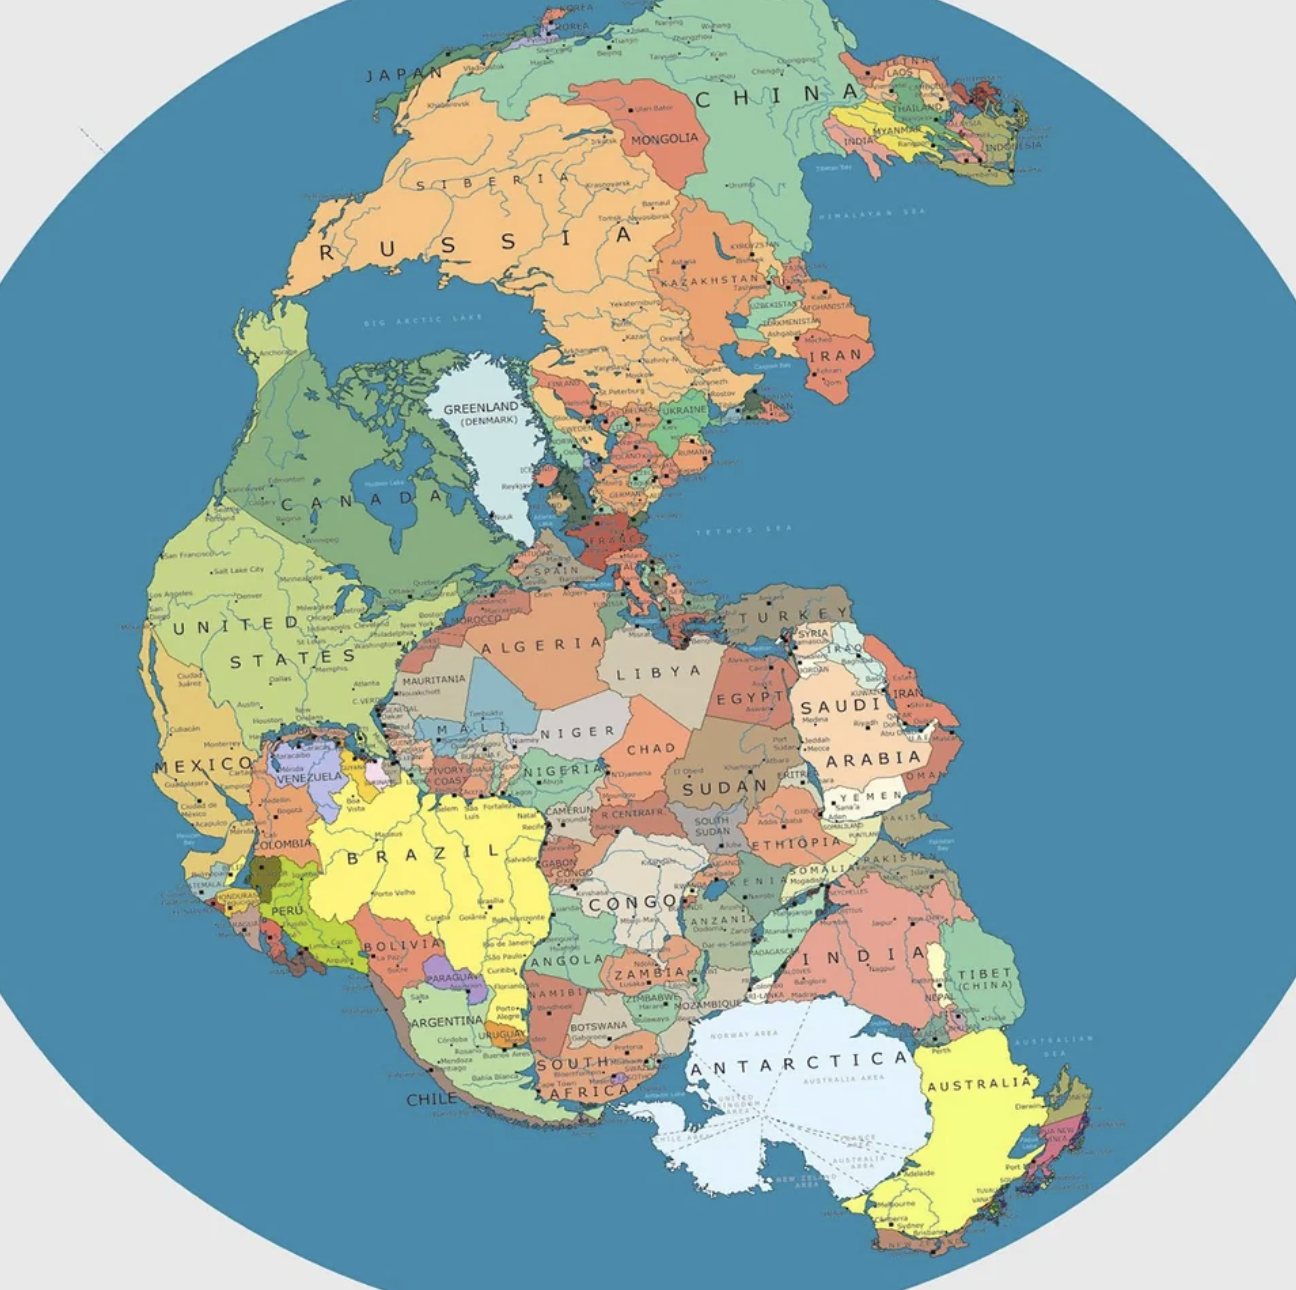 Pangea if it existed today